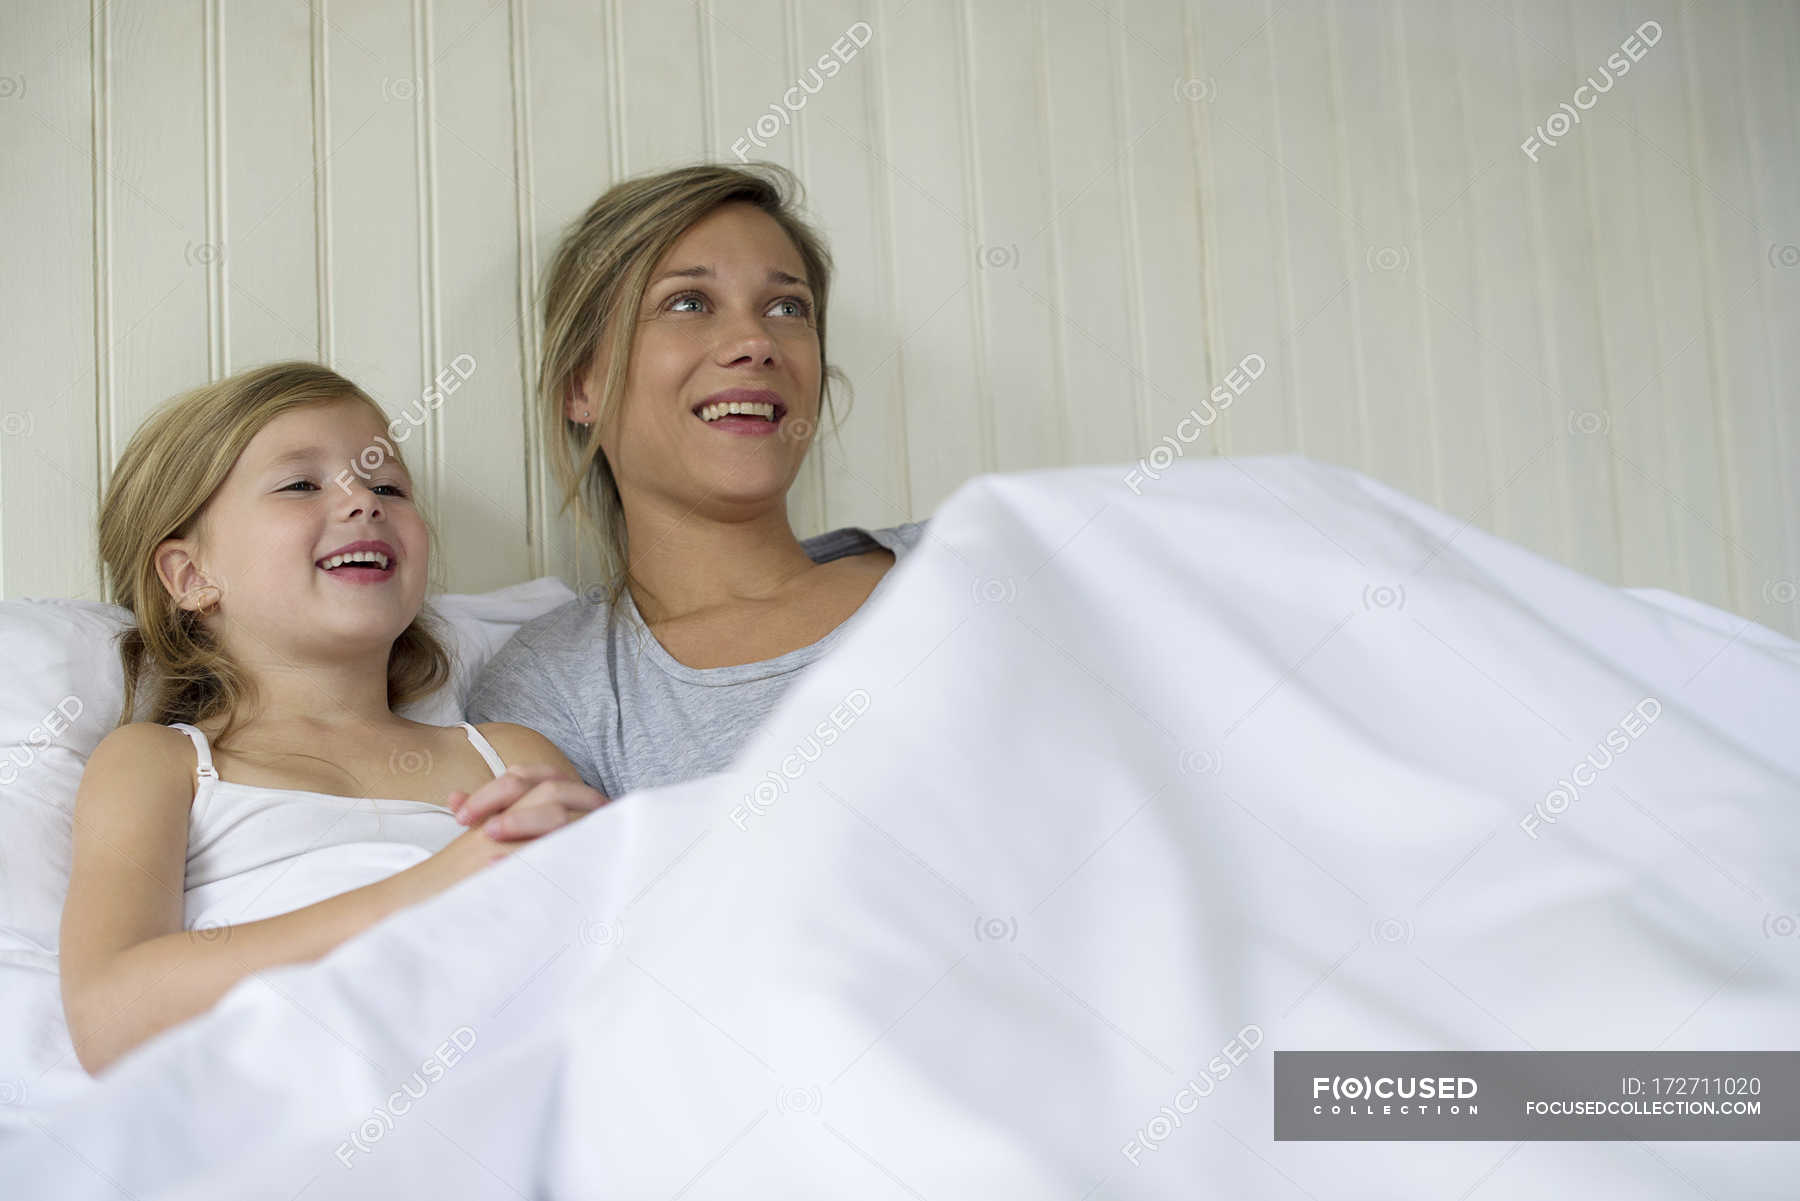 Daughter watches mom